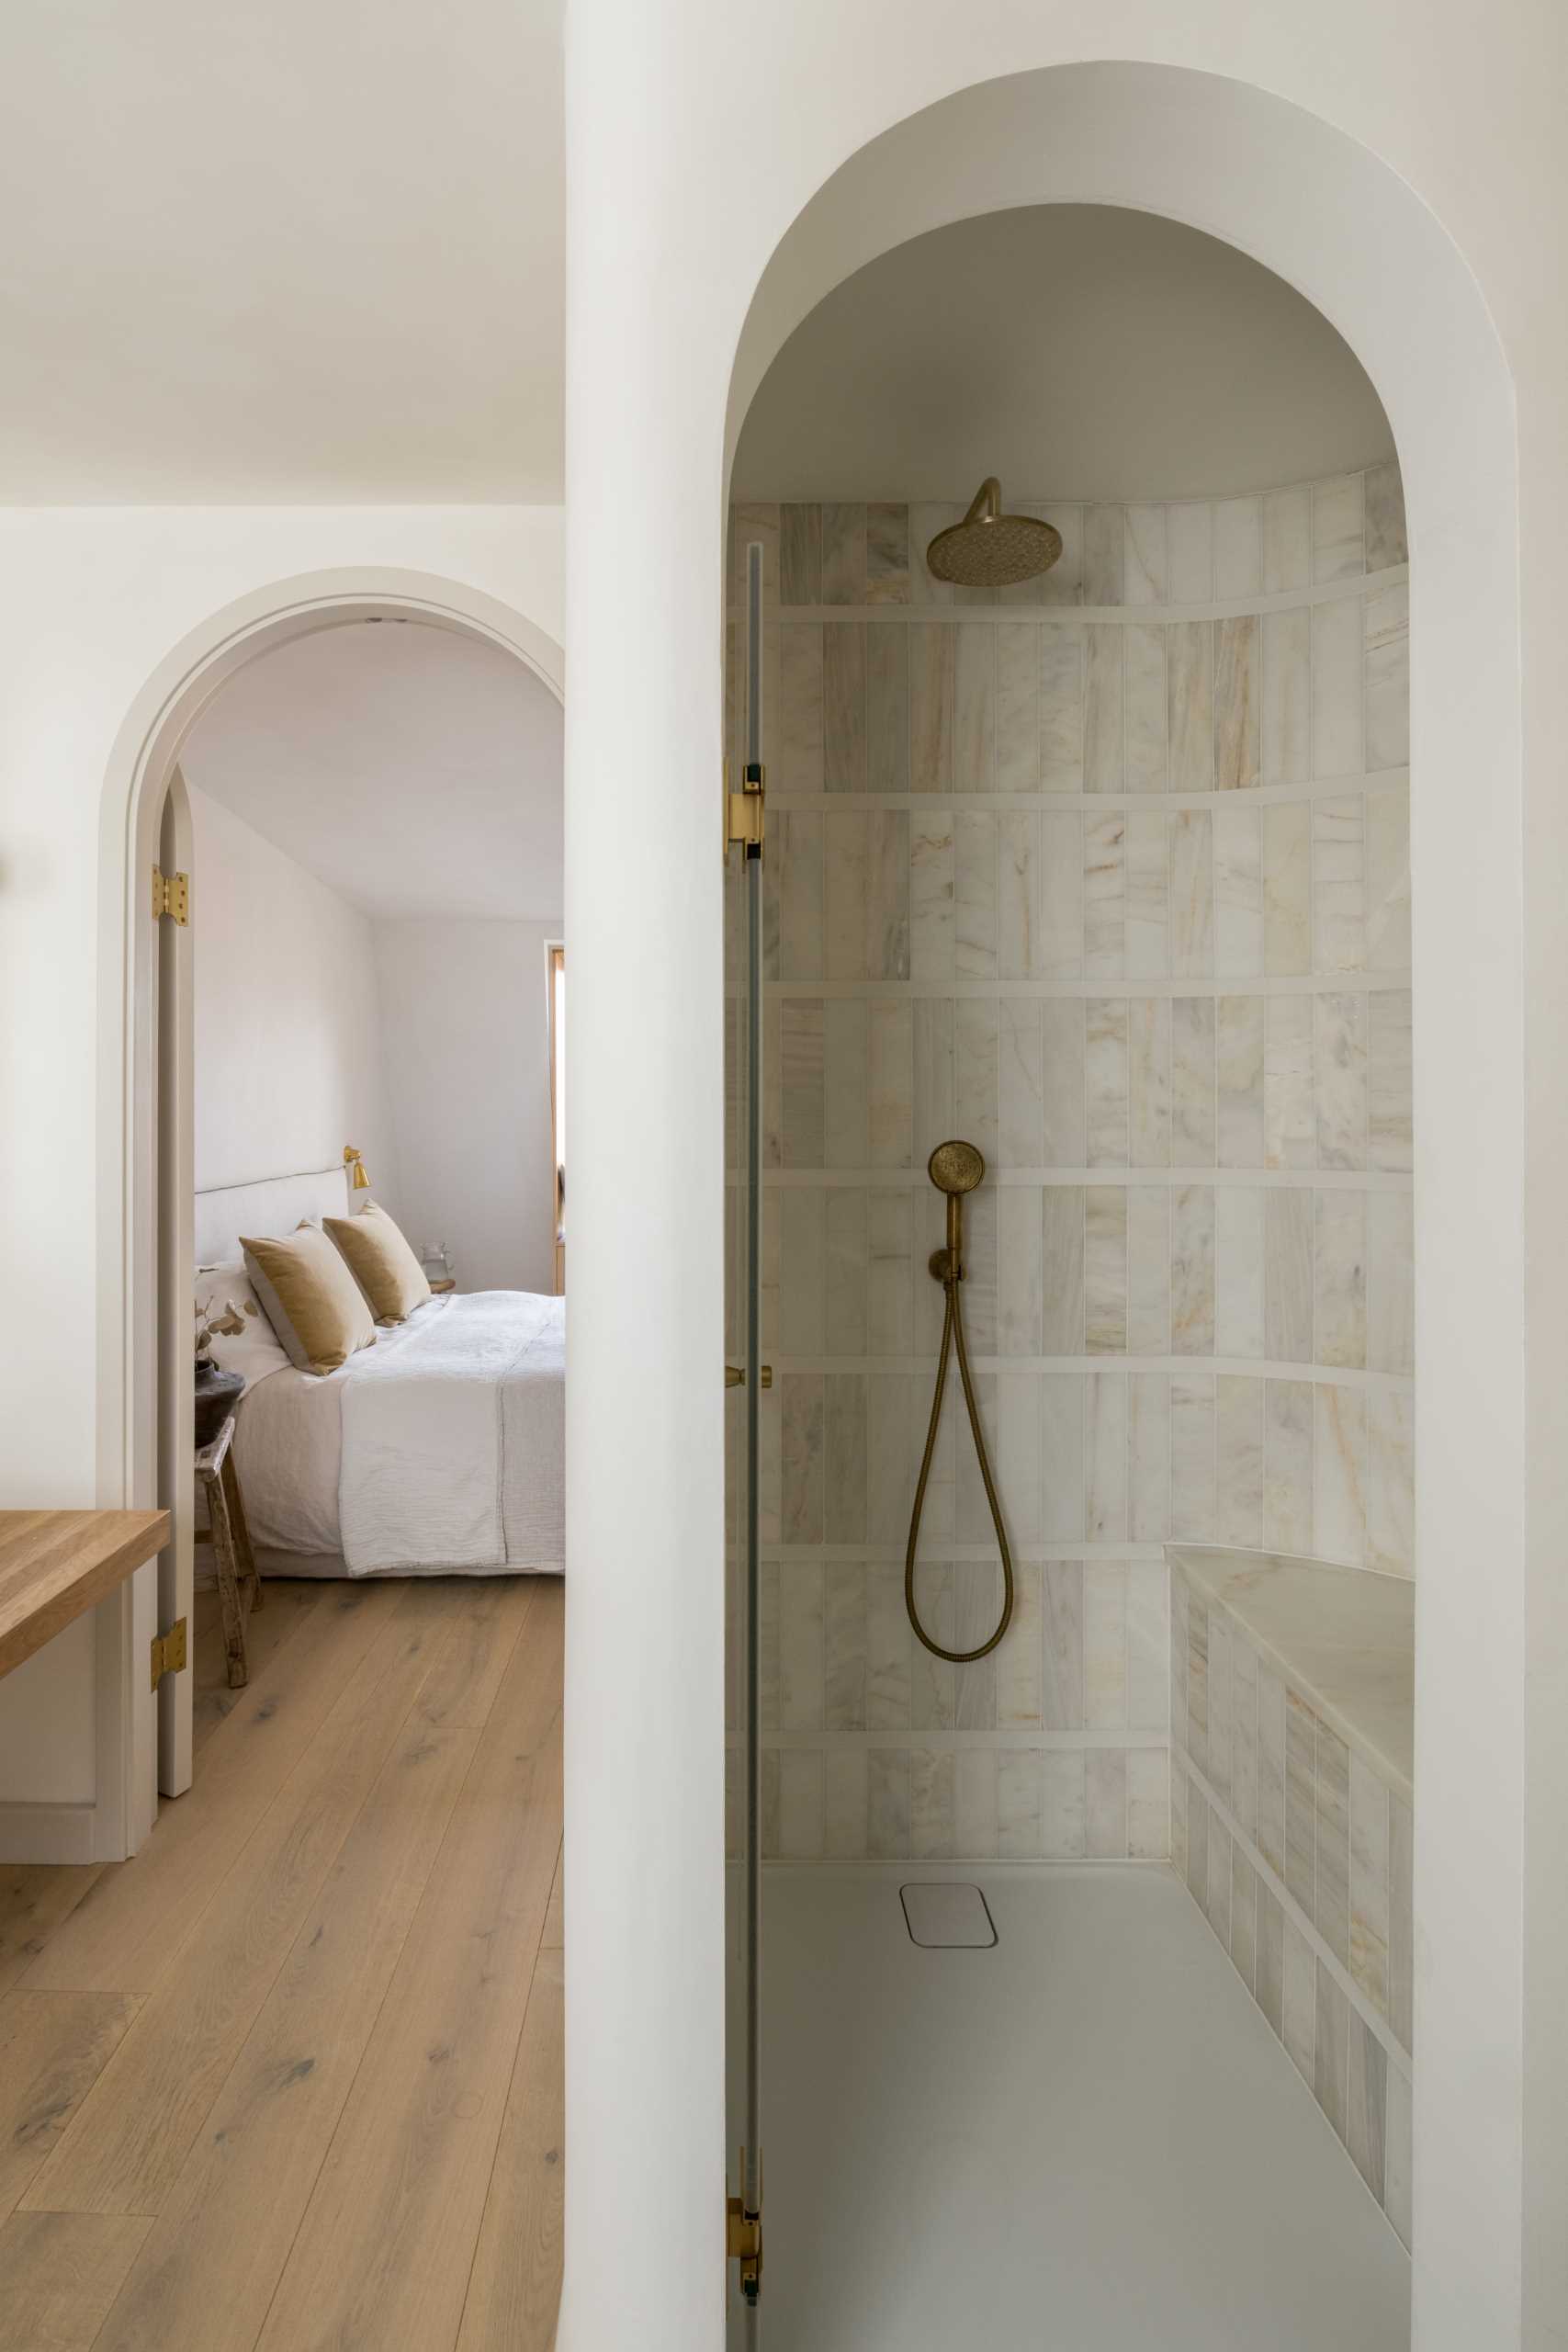 An arched doorway leads from the bedroom to the ensuite bathroom, where there's a freestanding bathtub under the window, a wood vanity, and a shower with a built-in seat.